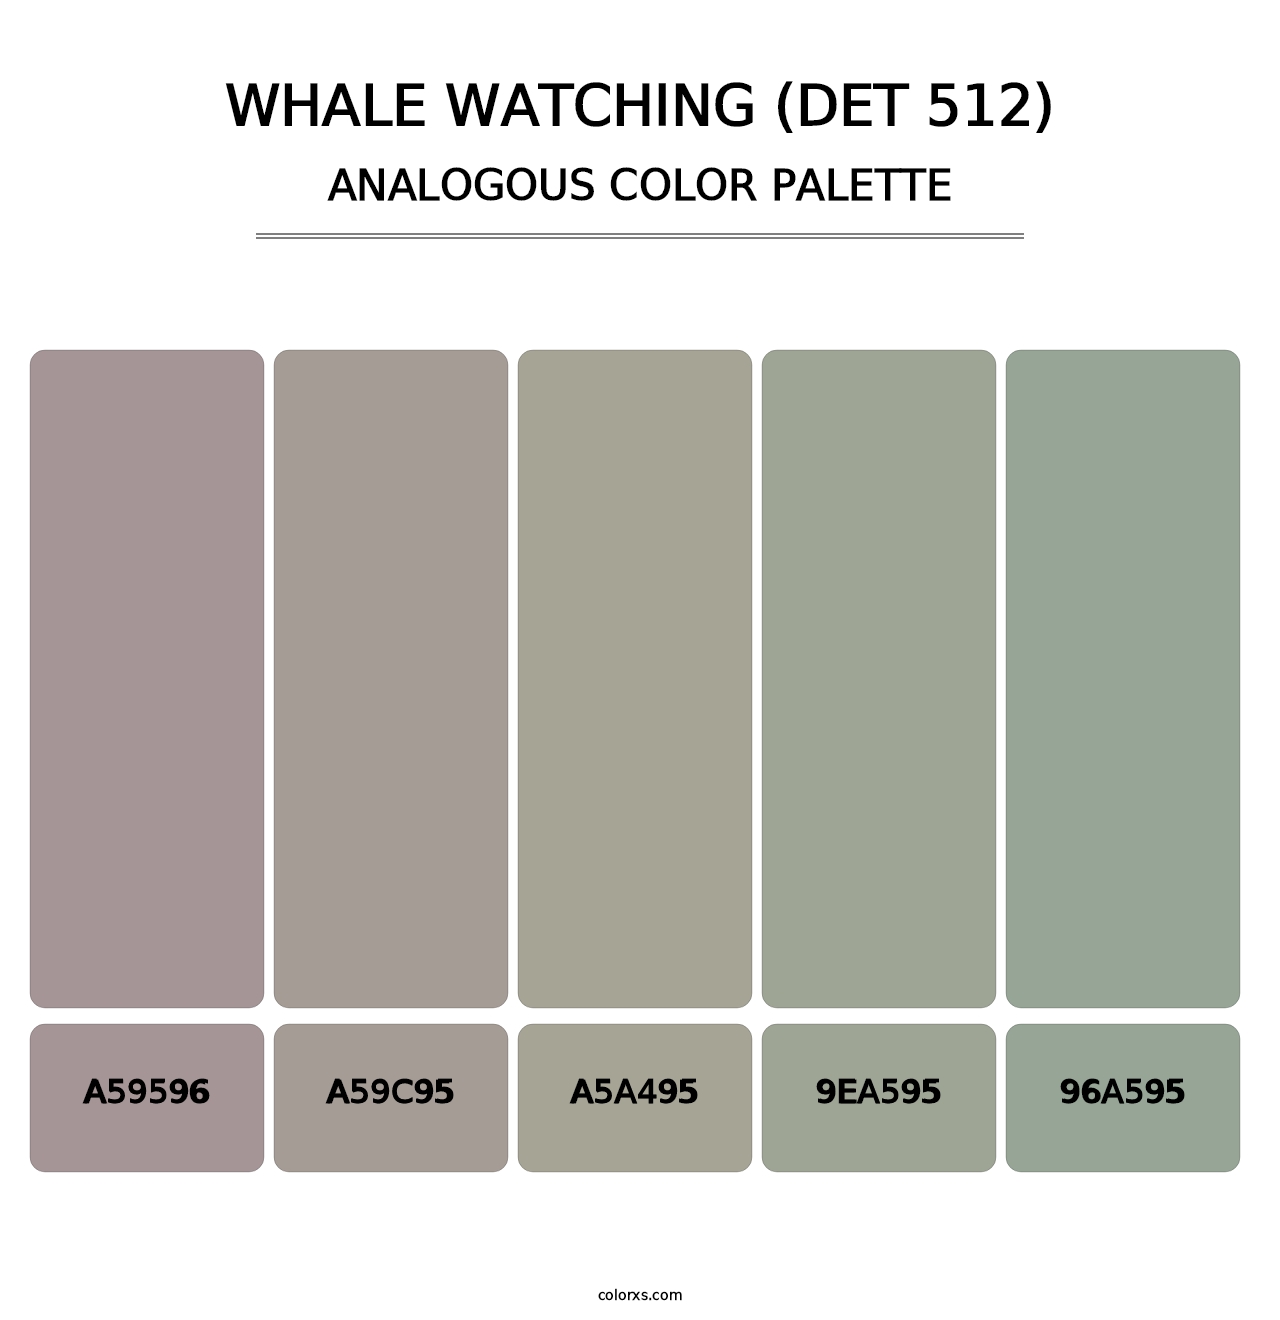 Whale Watching (DET 512) - Analogous Color Palette